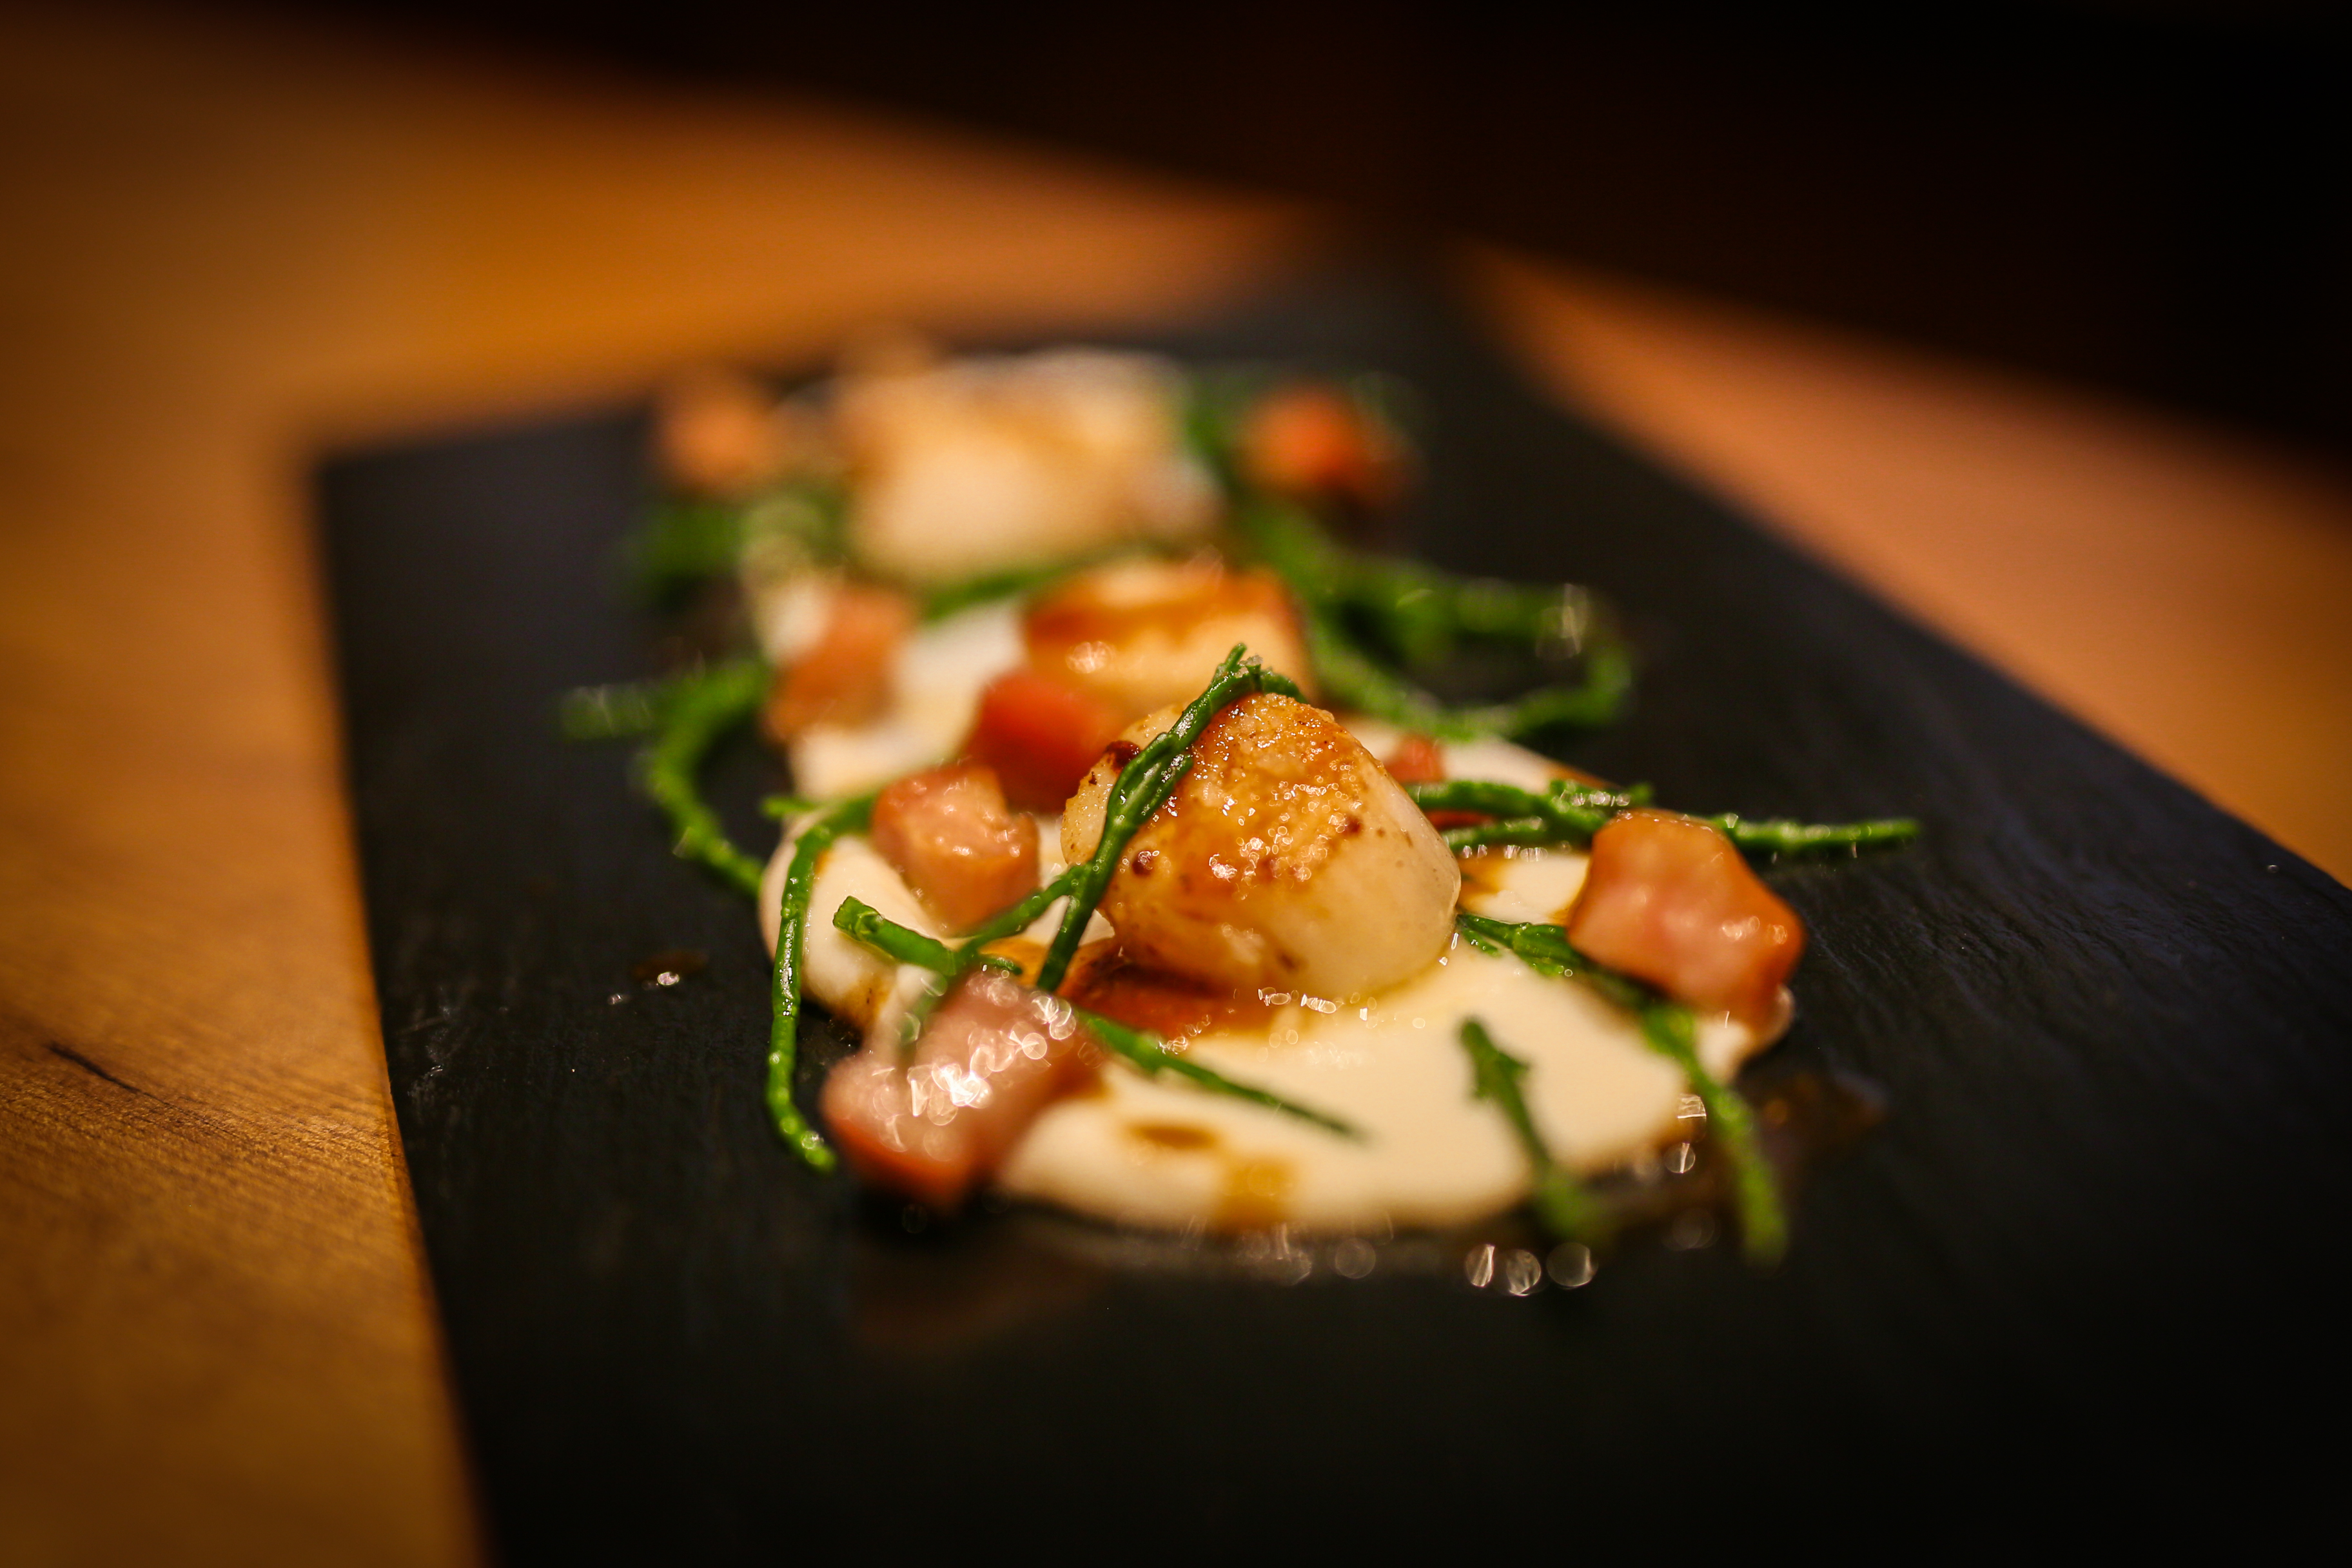 Grilled scallops with cauliflower puree, crispy bacon and lamb's lettuce